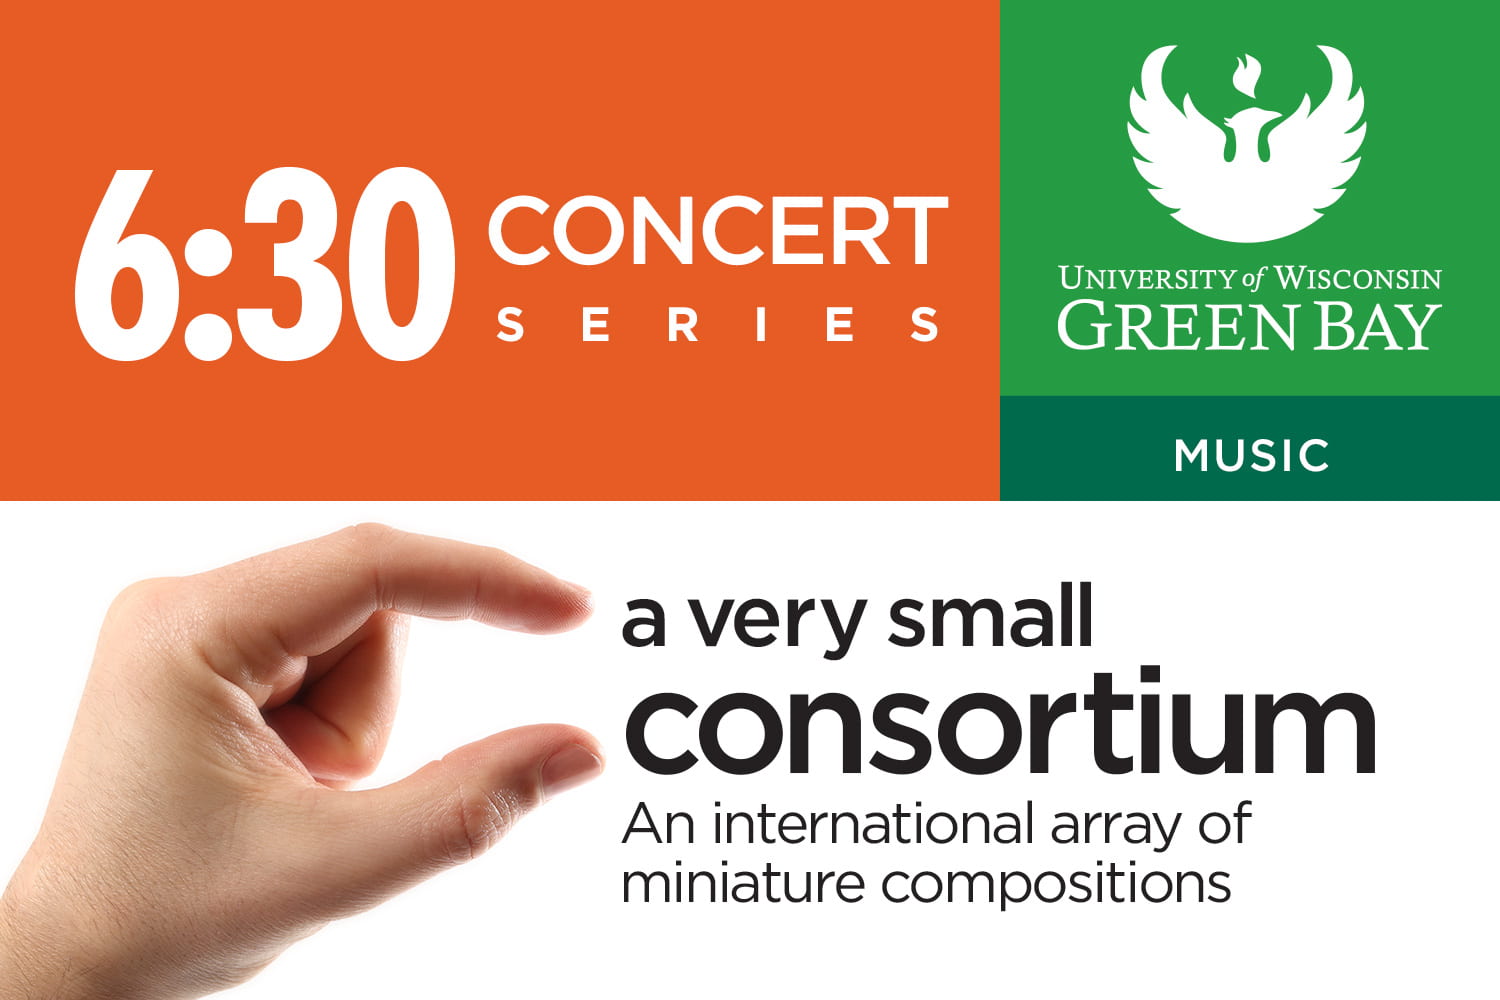 6:30 Concert Series - a very small consortium